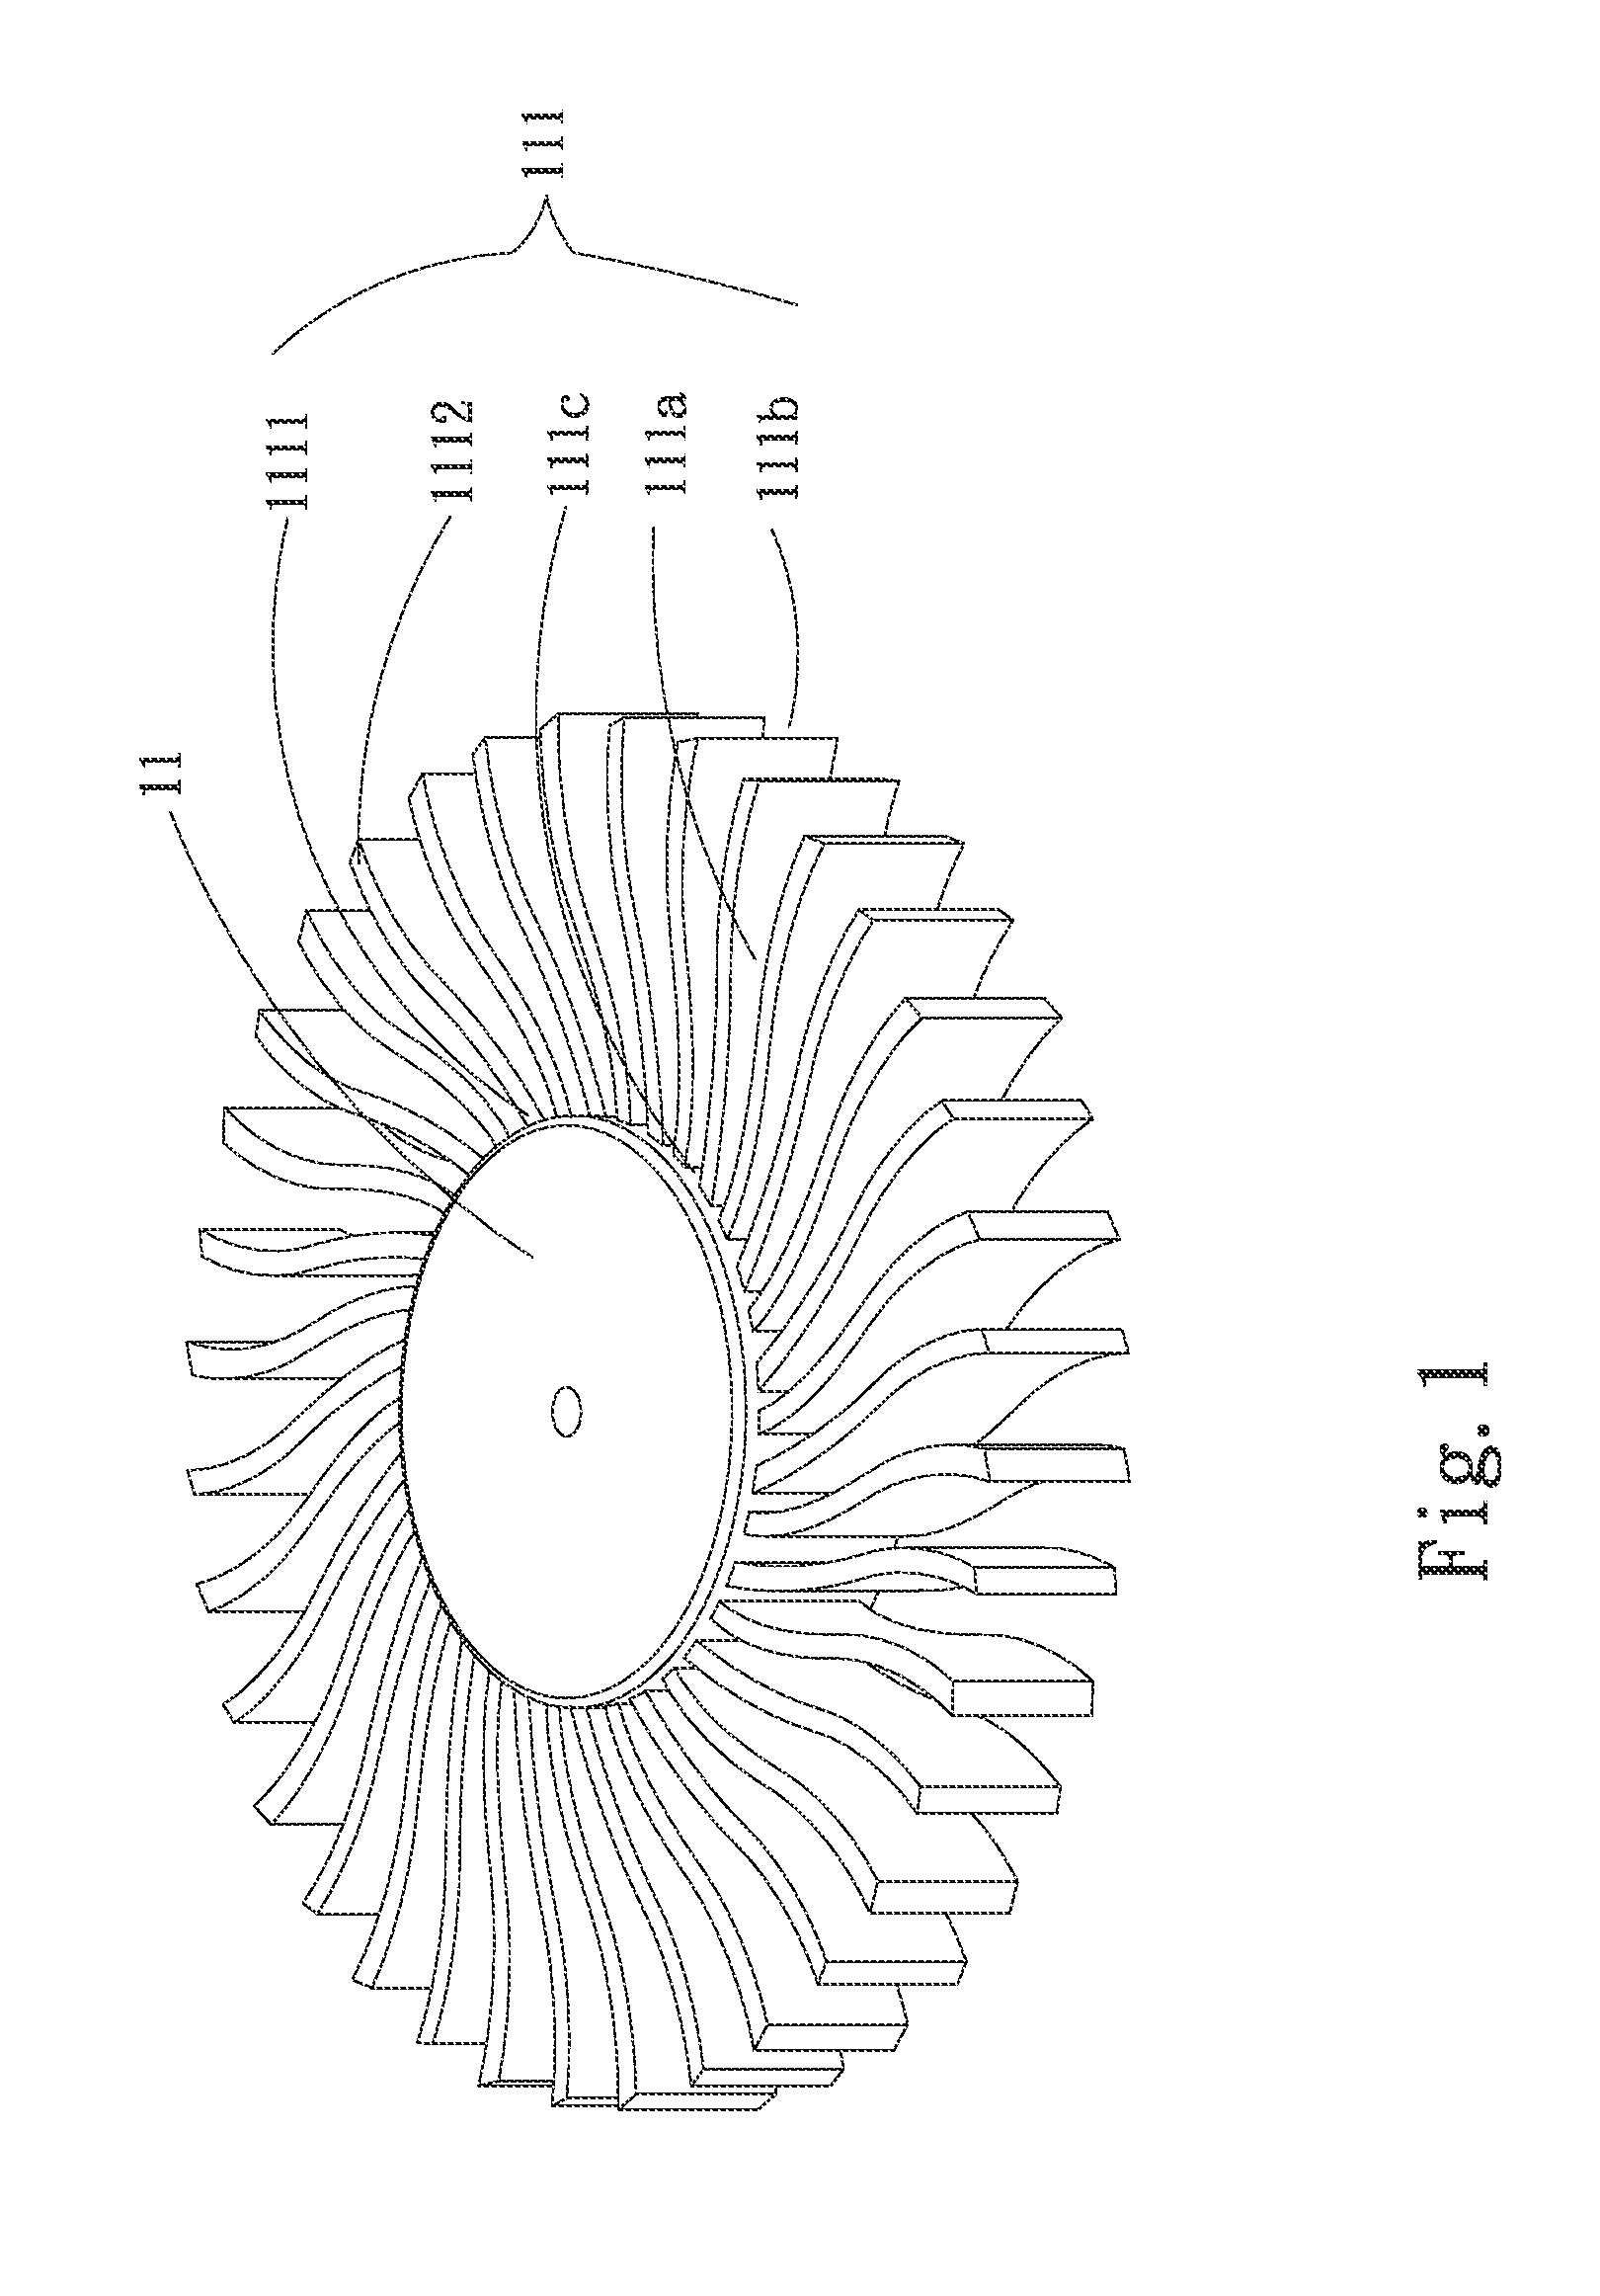 Centrifugal fan impeller structure